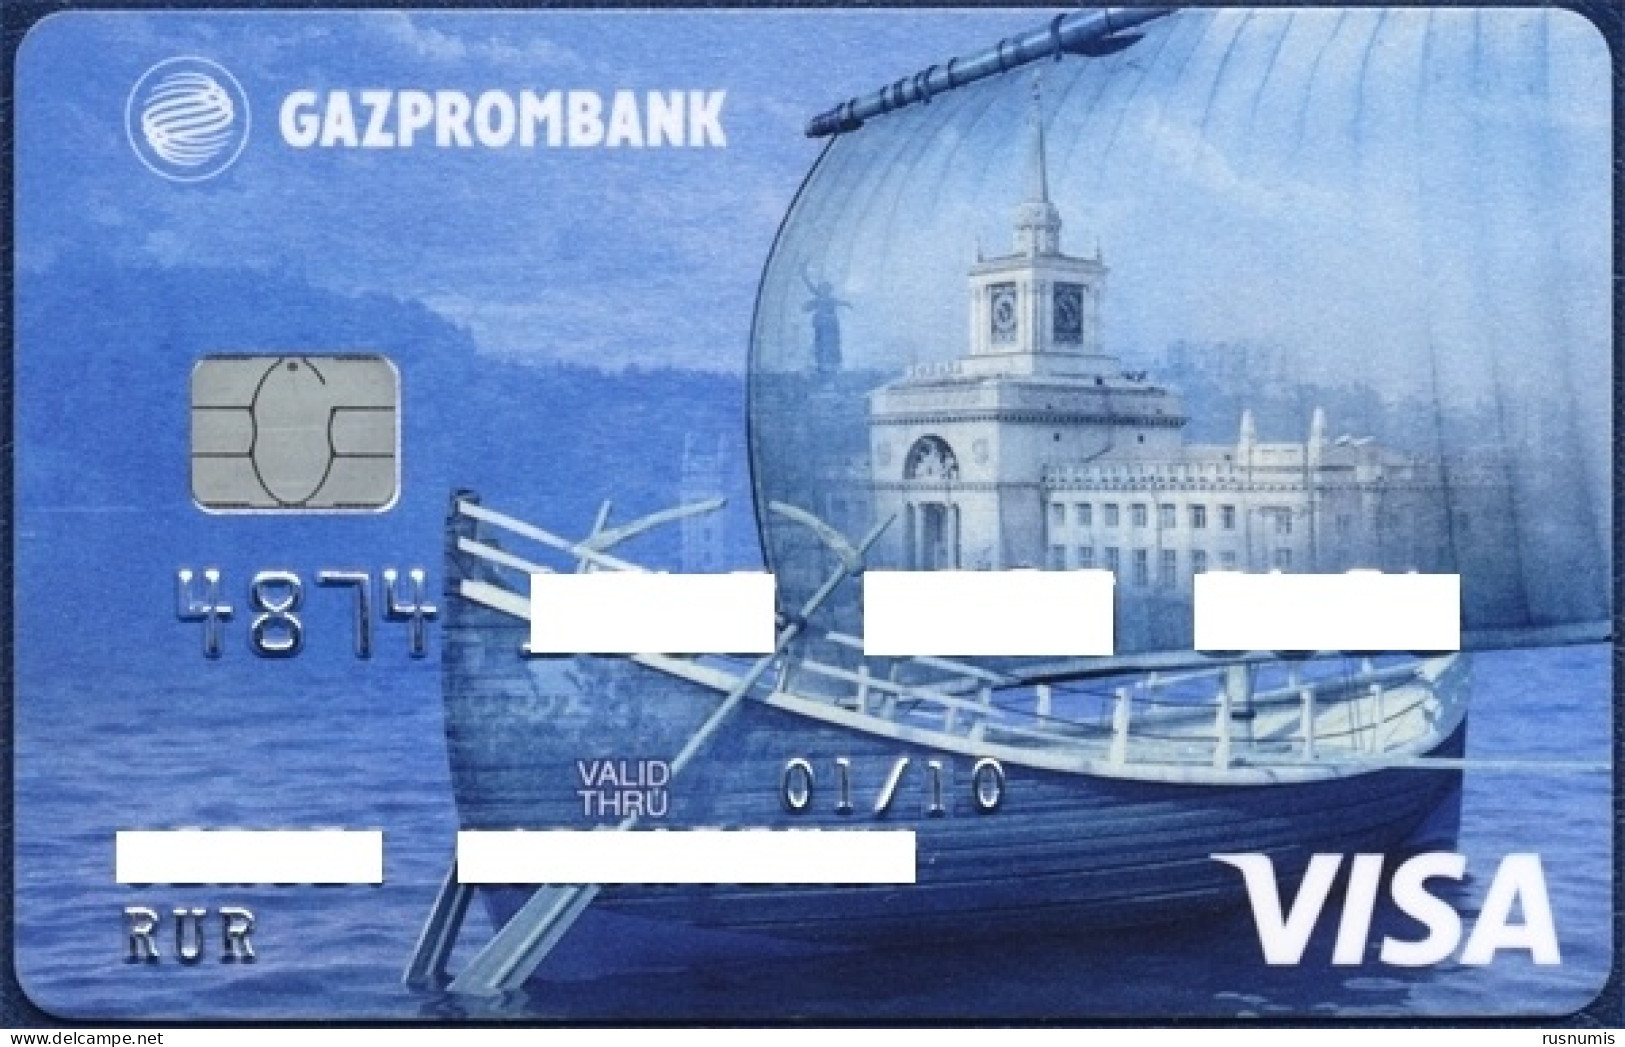 RUSSIA - RUSSIE - RUSSLAND GAZPROM BANK VISA CARD SHIP BOAT RIVER STATION EXPIRED - Credit Cards (Exp. Date Min. 10 Years)